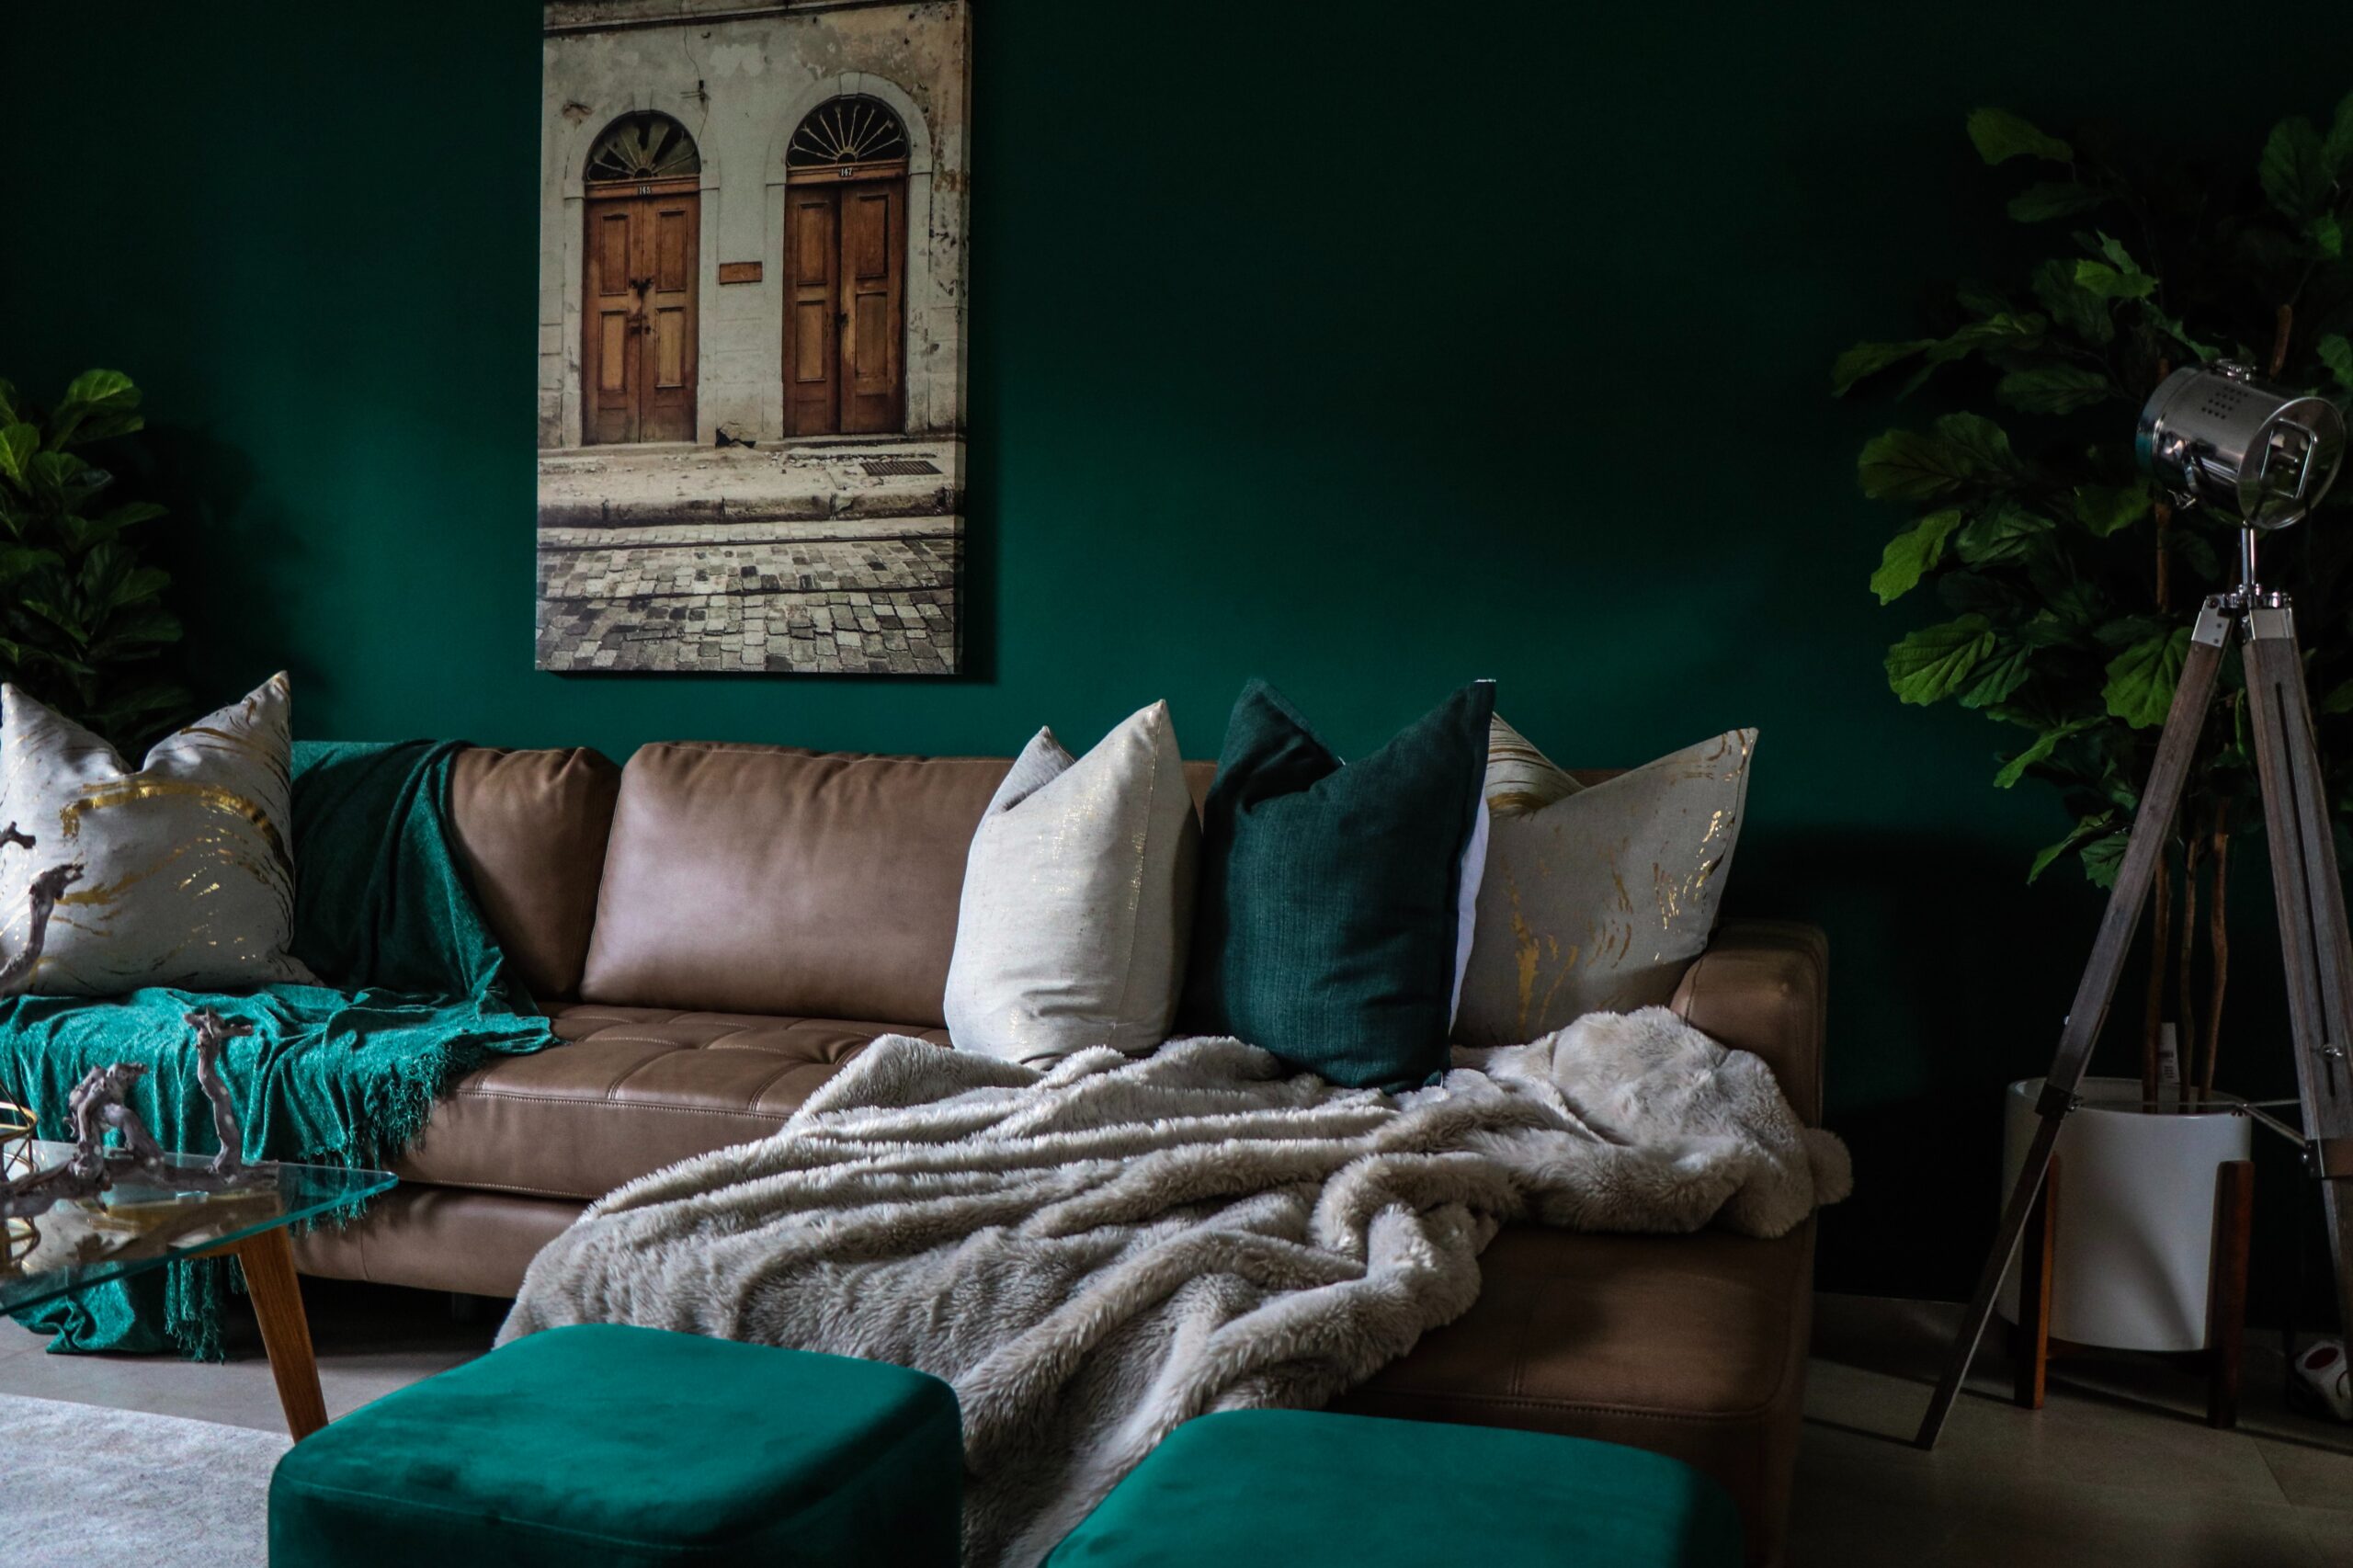 Learn how to clean a leather couch with these products which can remove stains and keep it looking polished. Pictured: A leather couch in a living room with throw pillows and blankets.